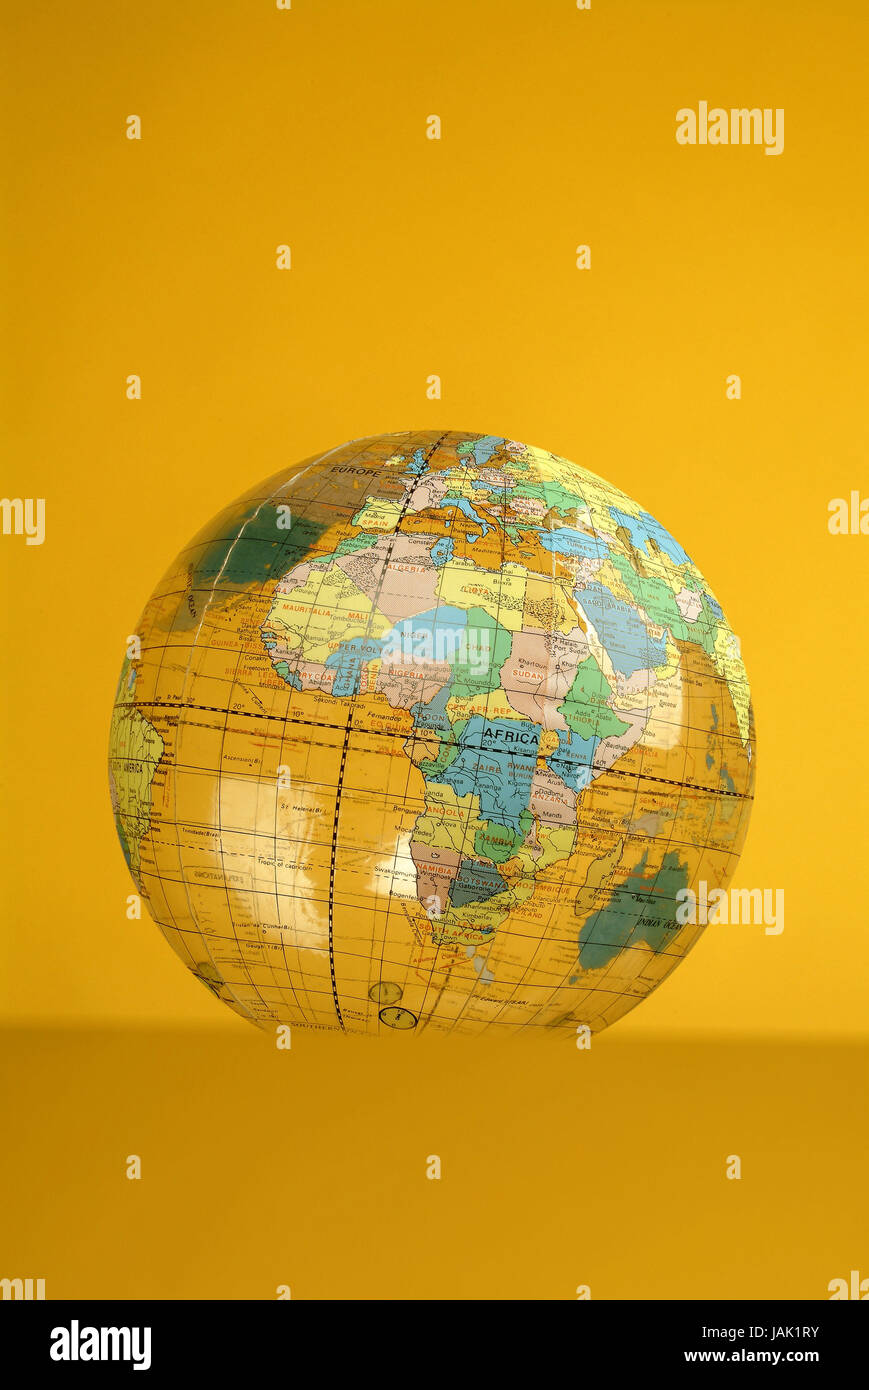 Map of the world on a beach-ball, Stock Photo